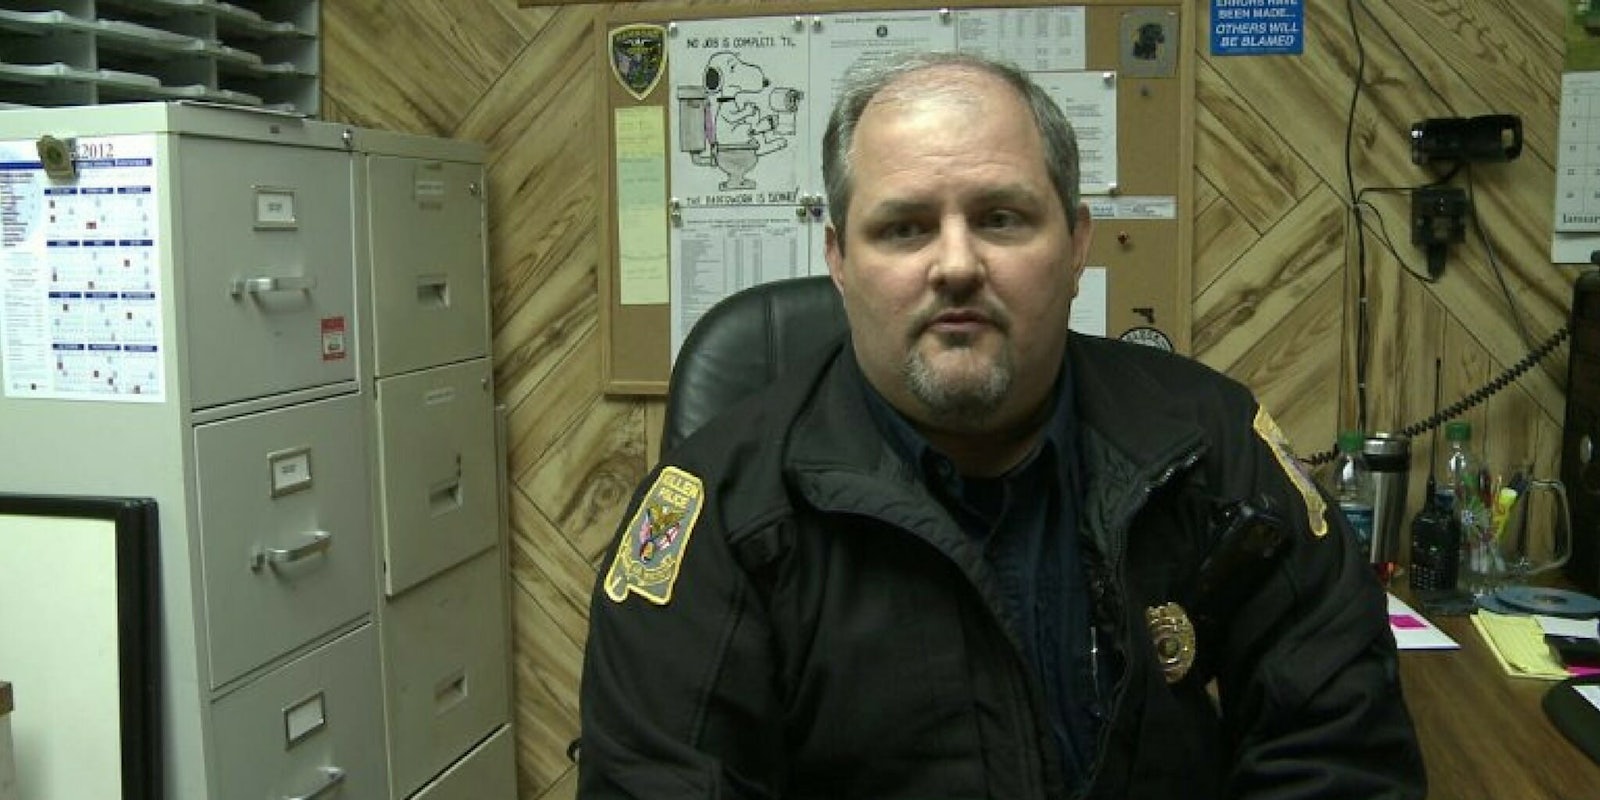 Killen Police Chief Bryan Hammond was suspended for writing 'silence is consent' on Facebook.